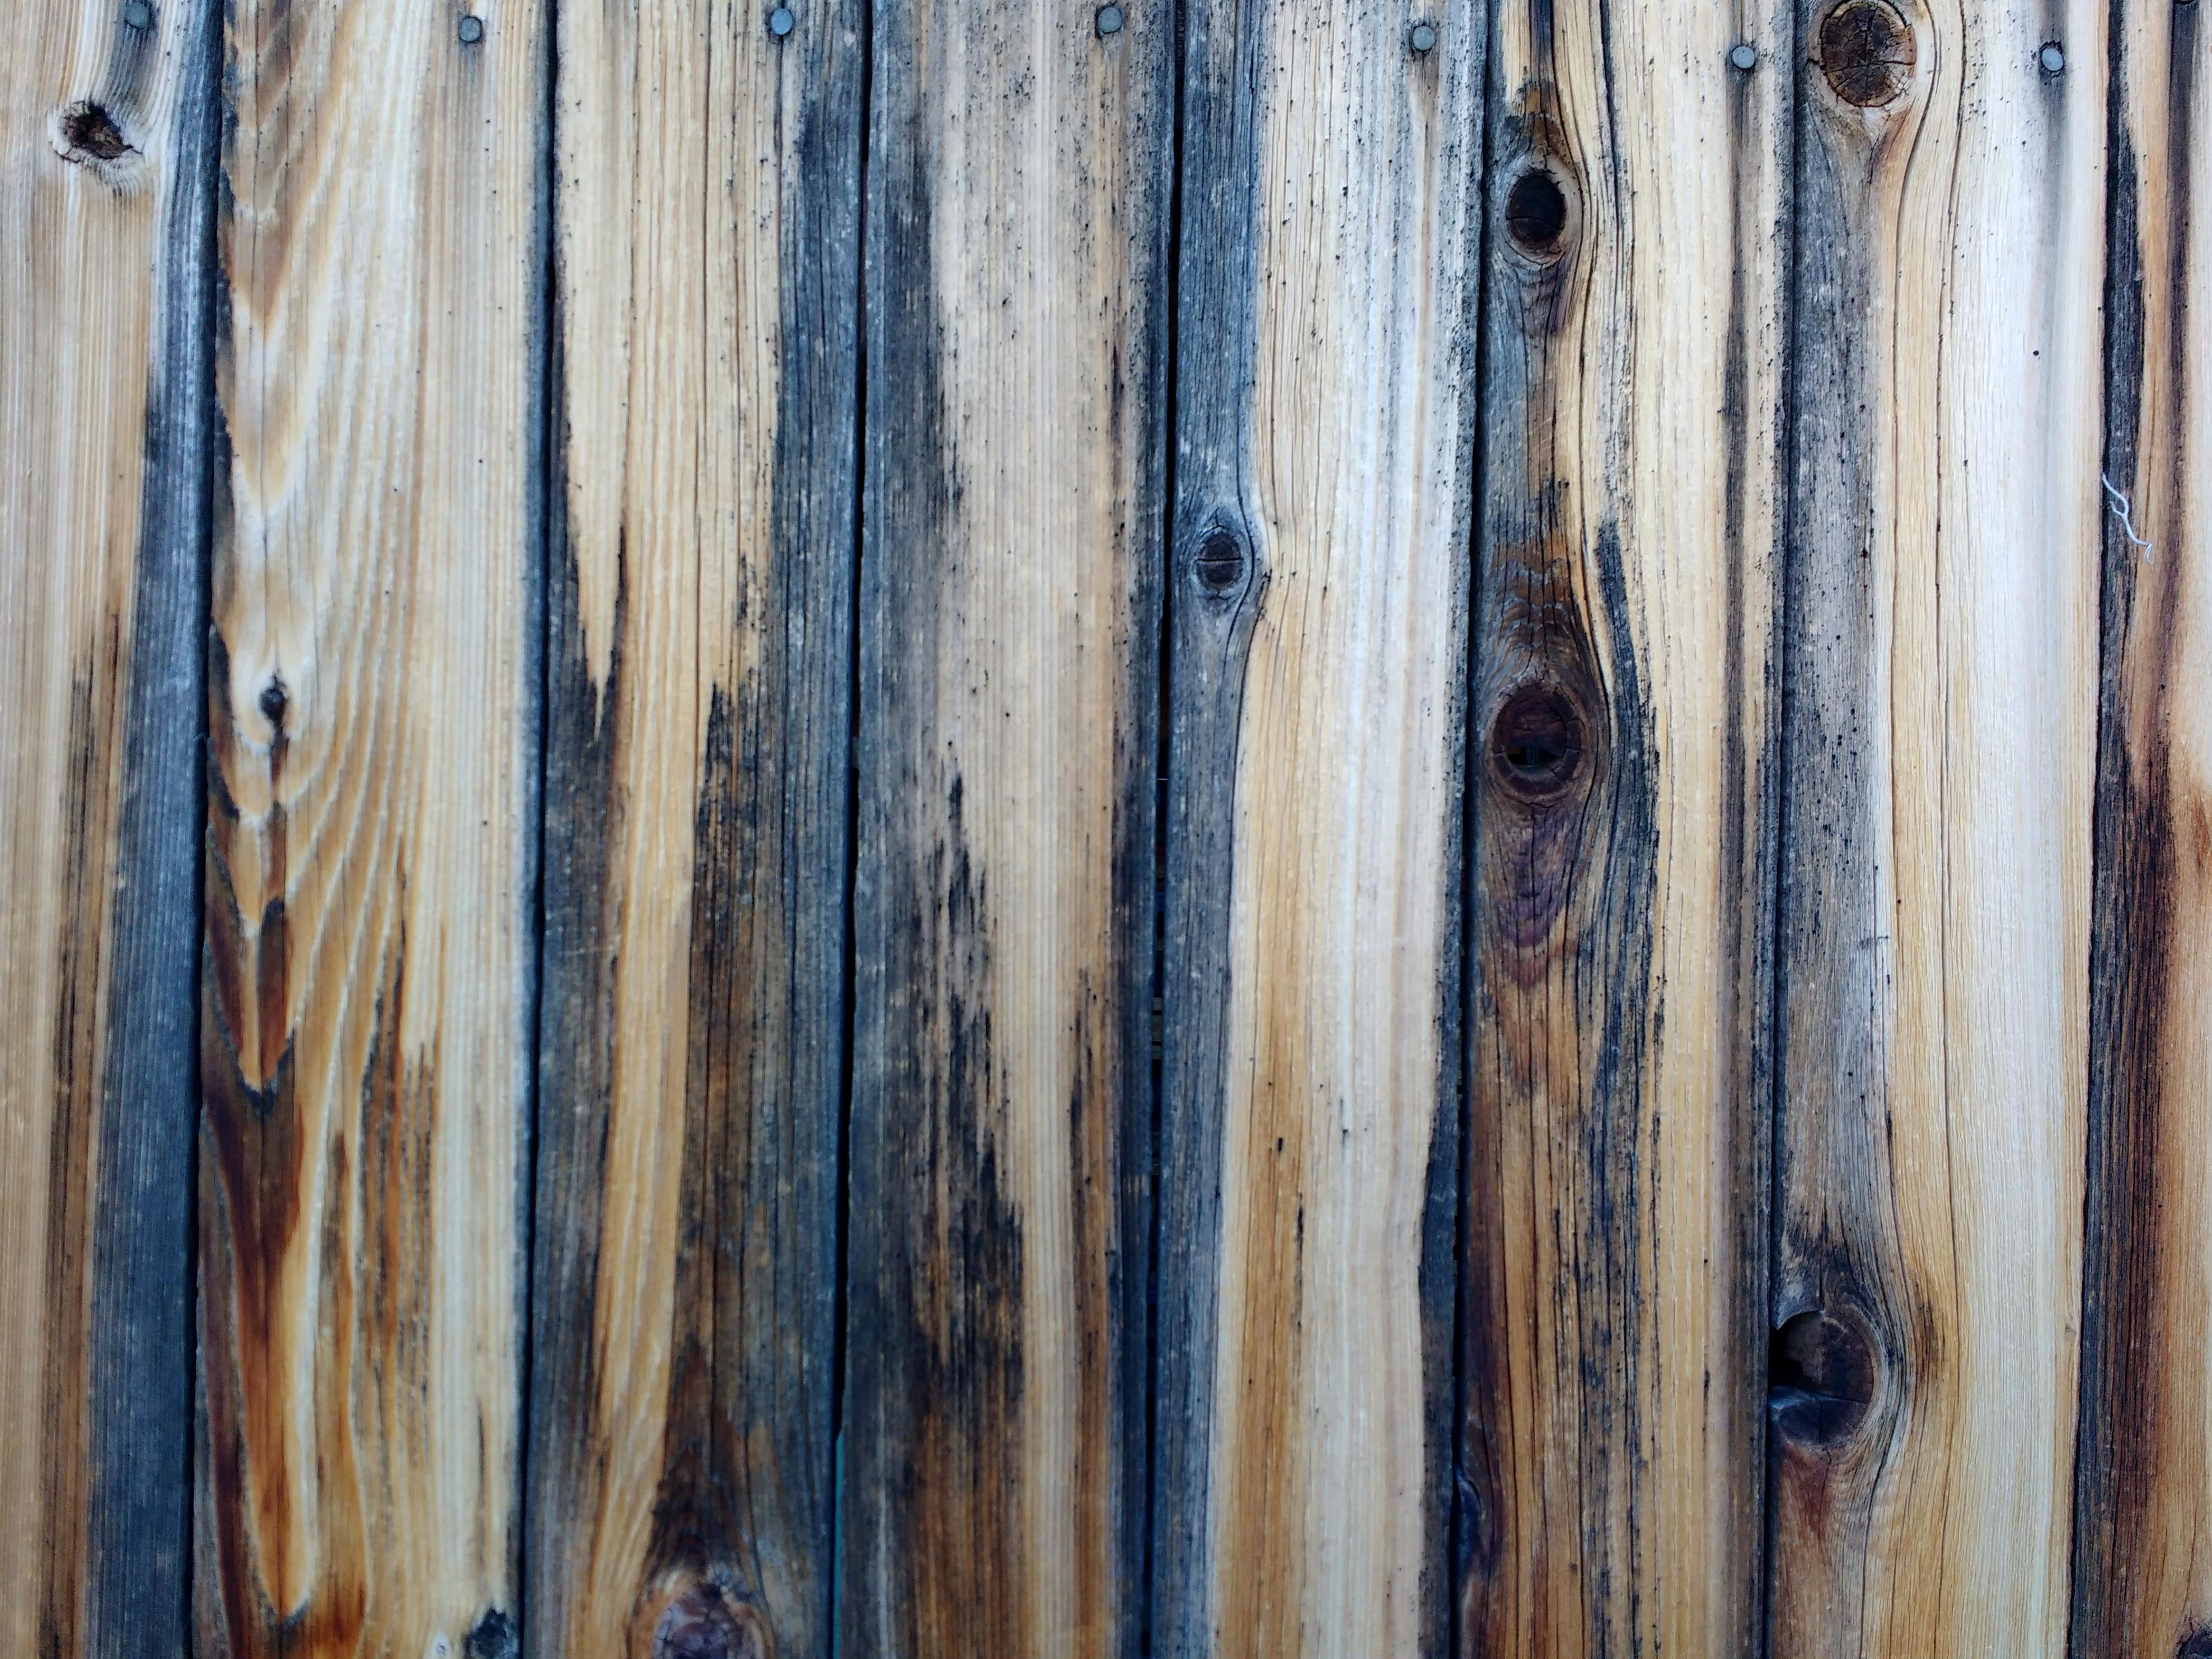 Free picture: wooden slats, planks, close